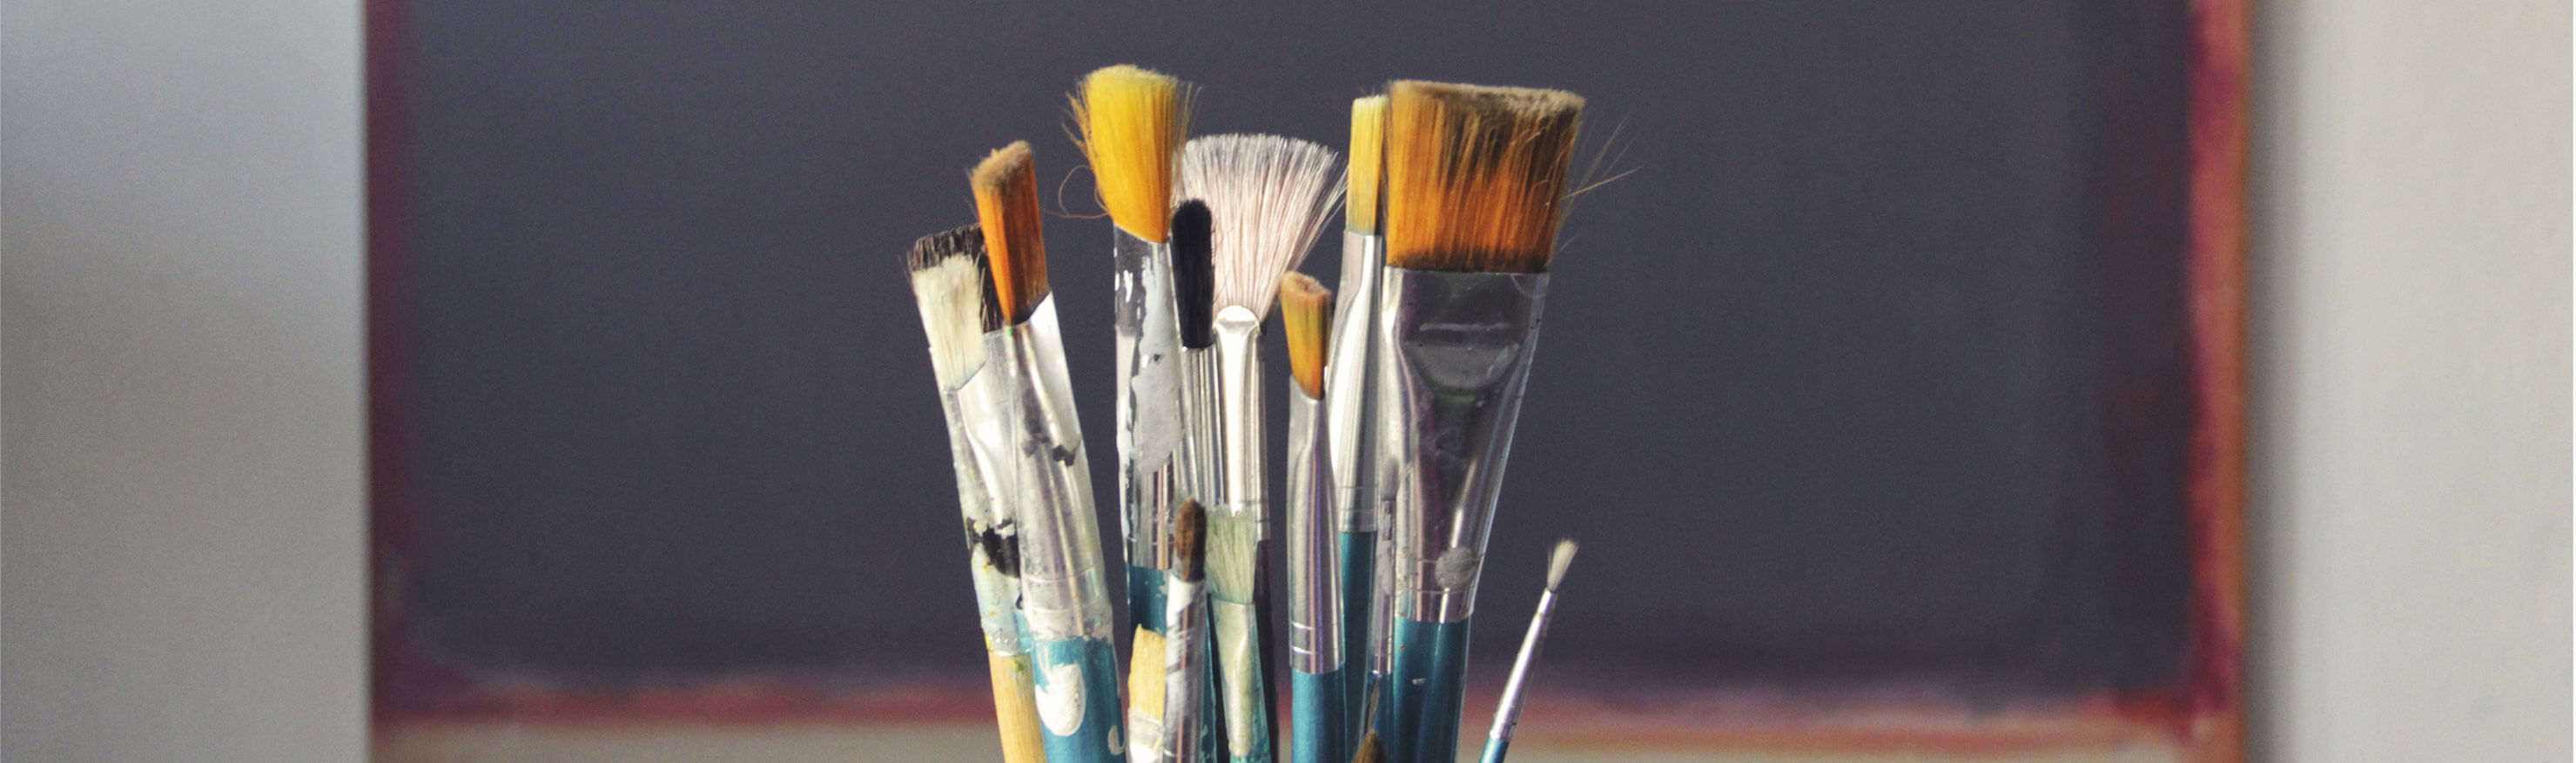 Brushes in front of a frame